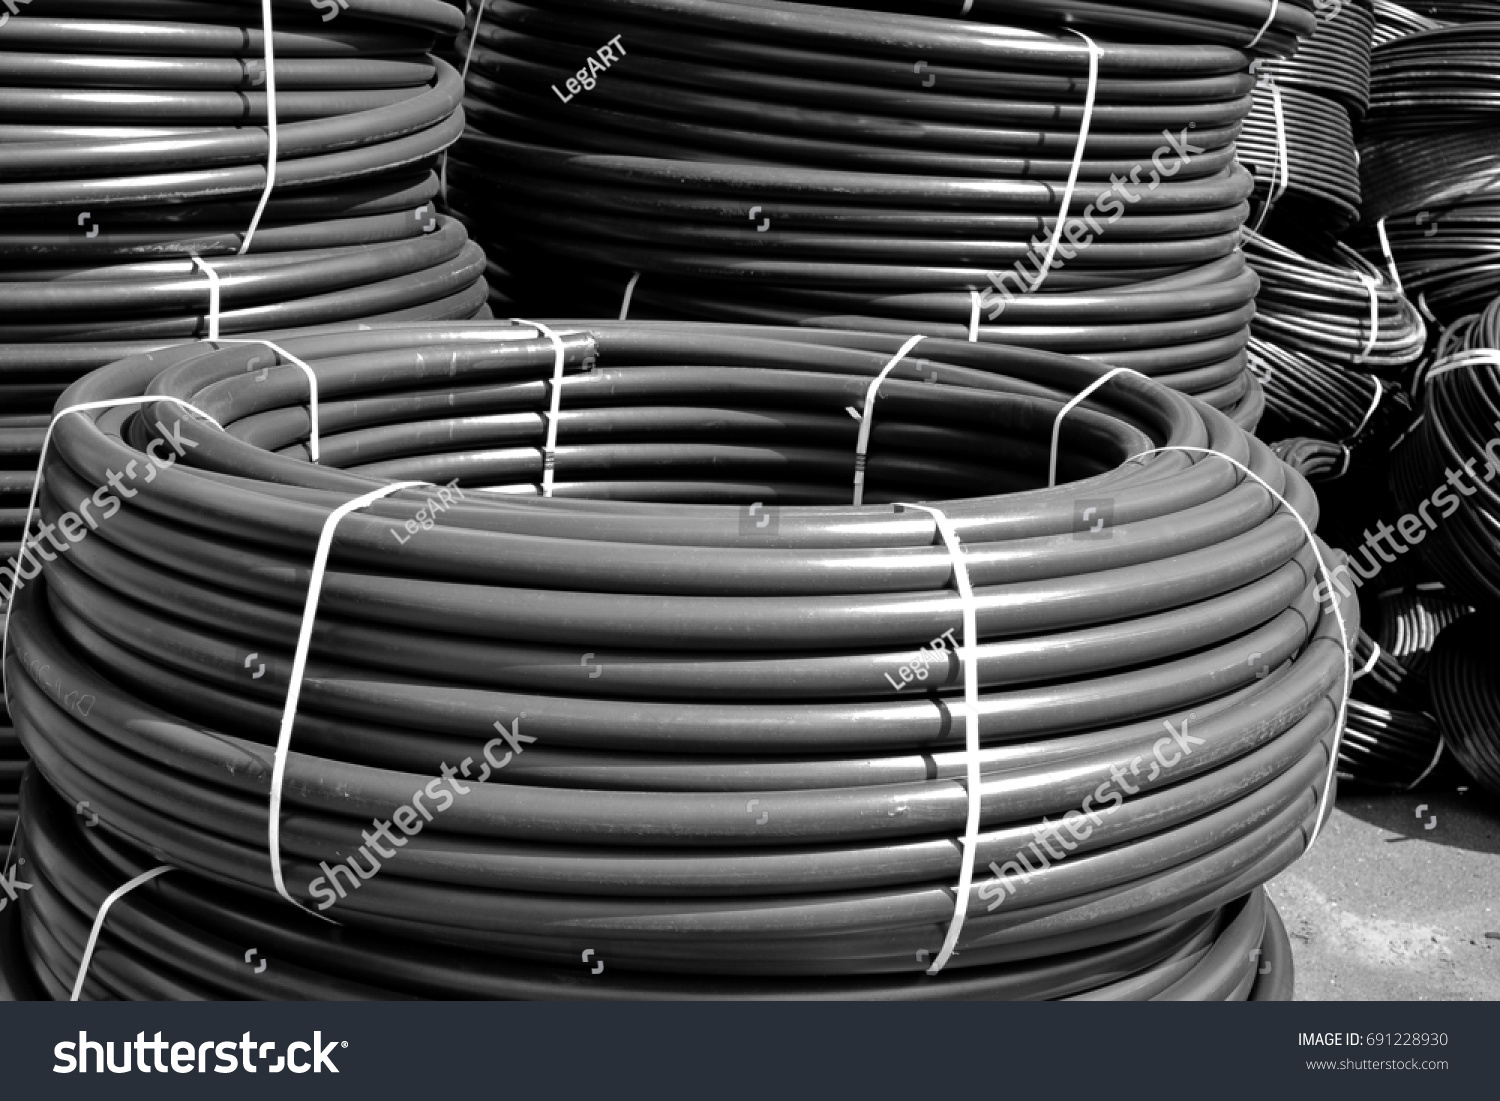 Coiled black plastic pipes stored outdoors #691228930